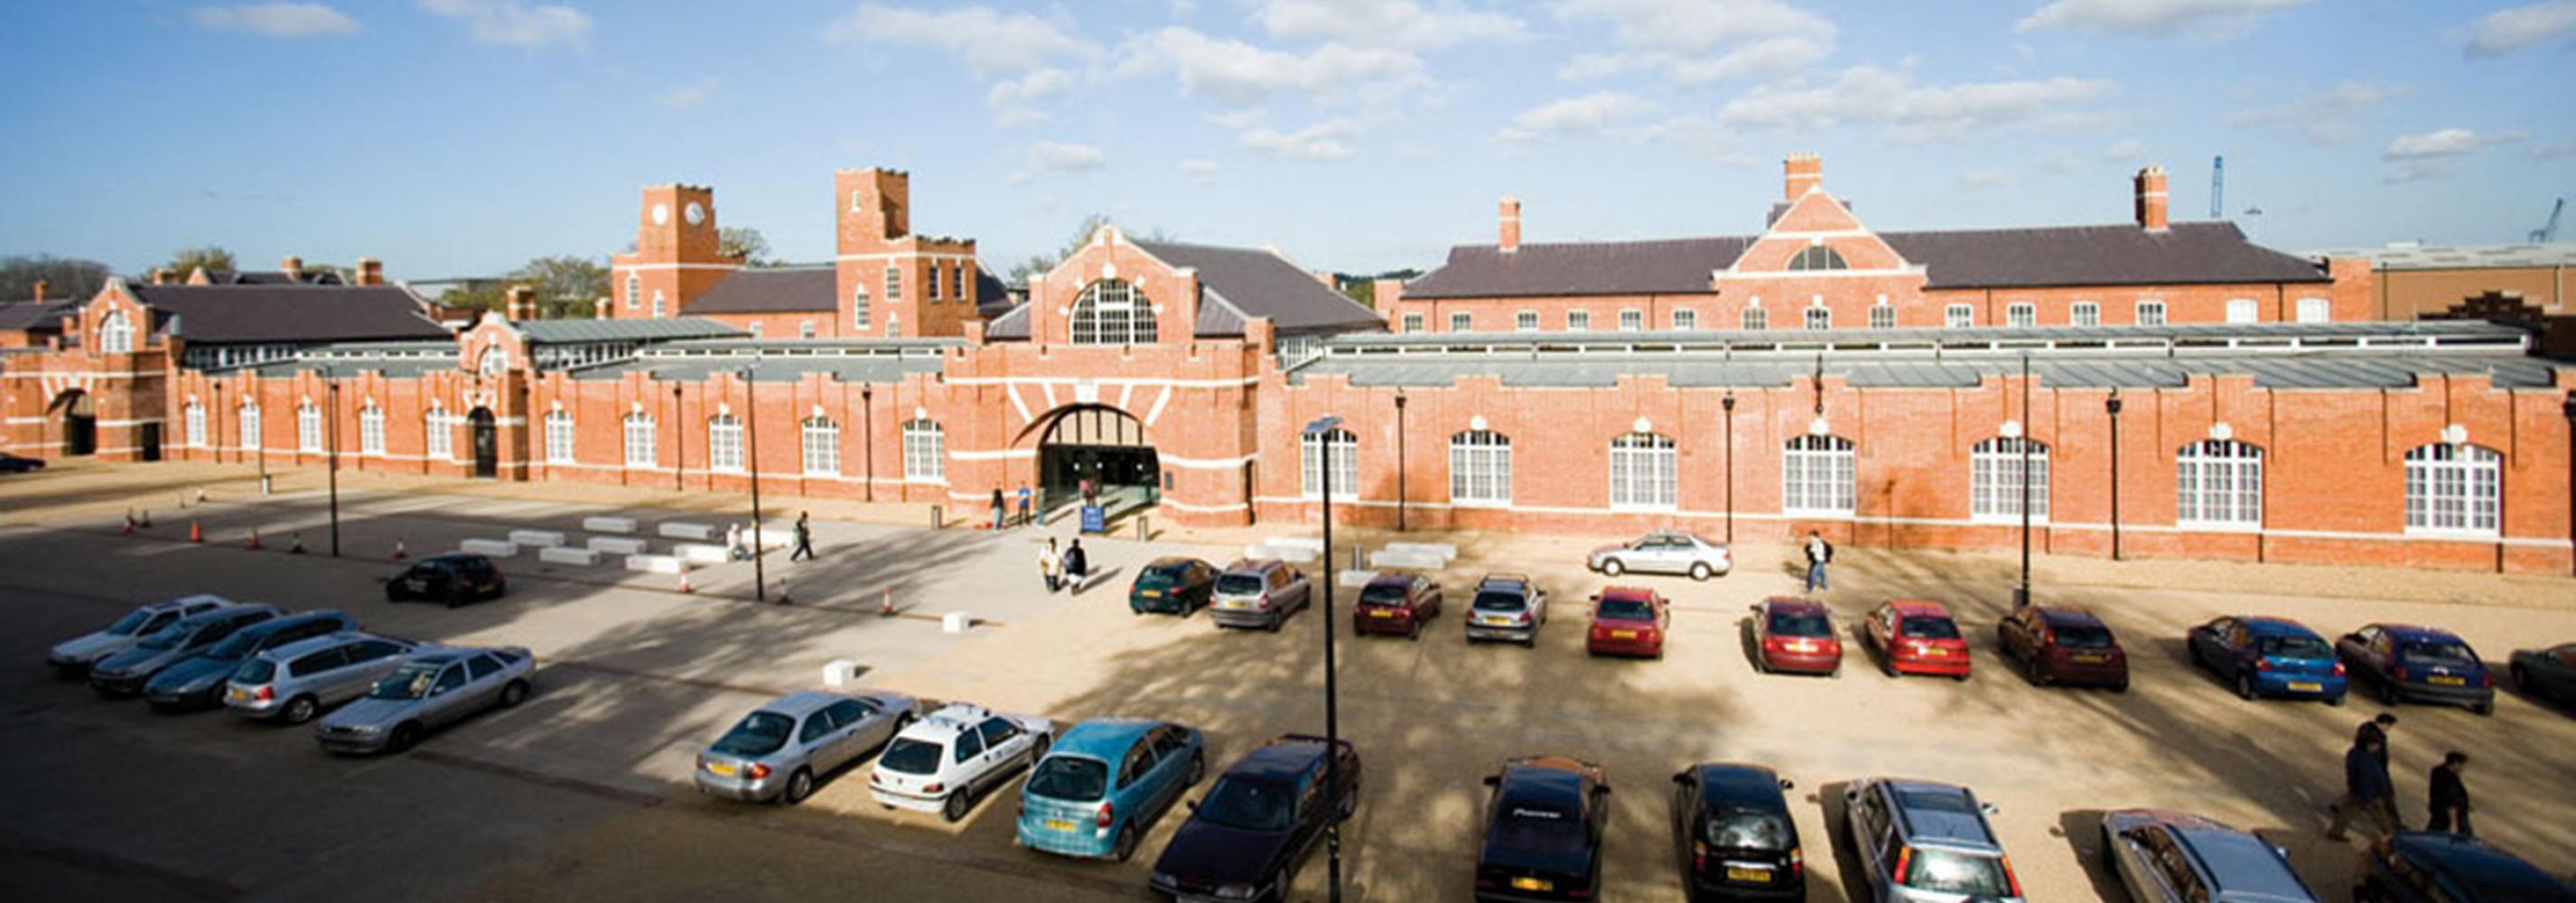 Drill Hall Library